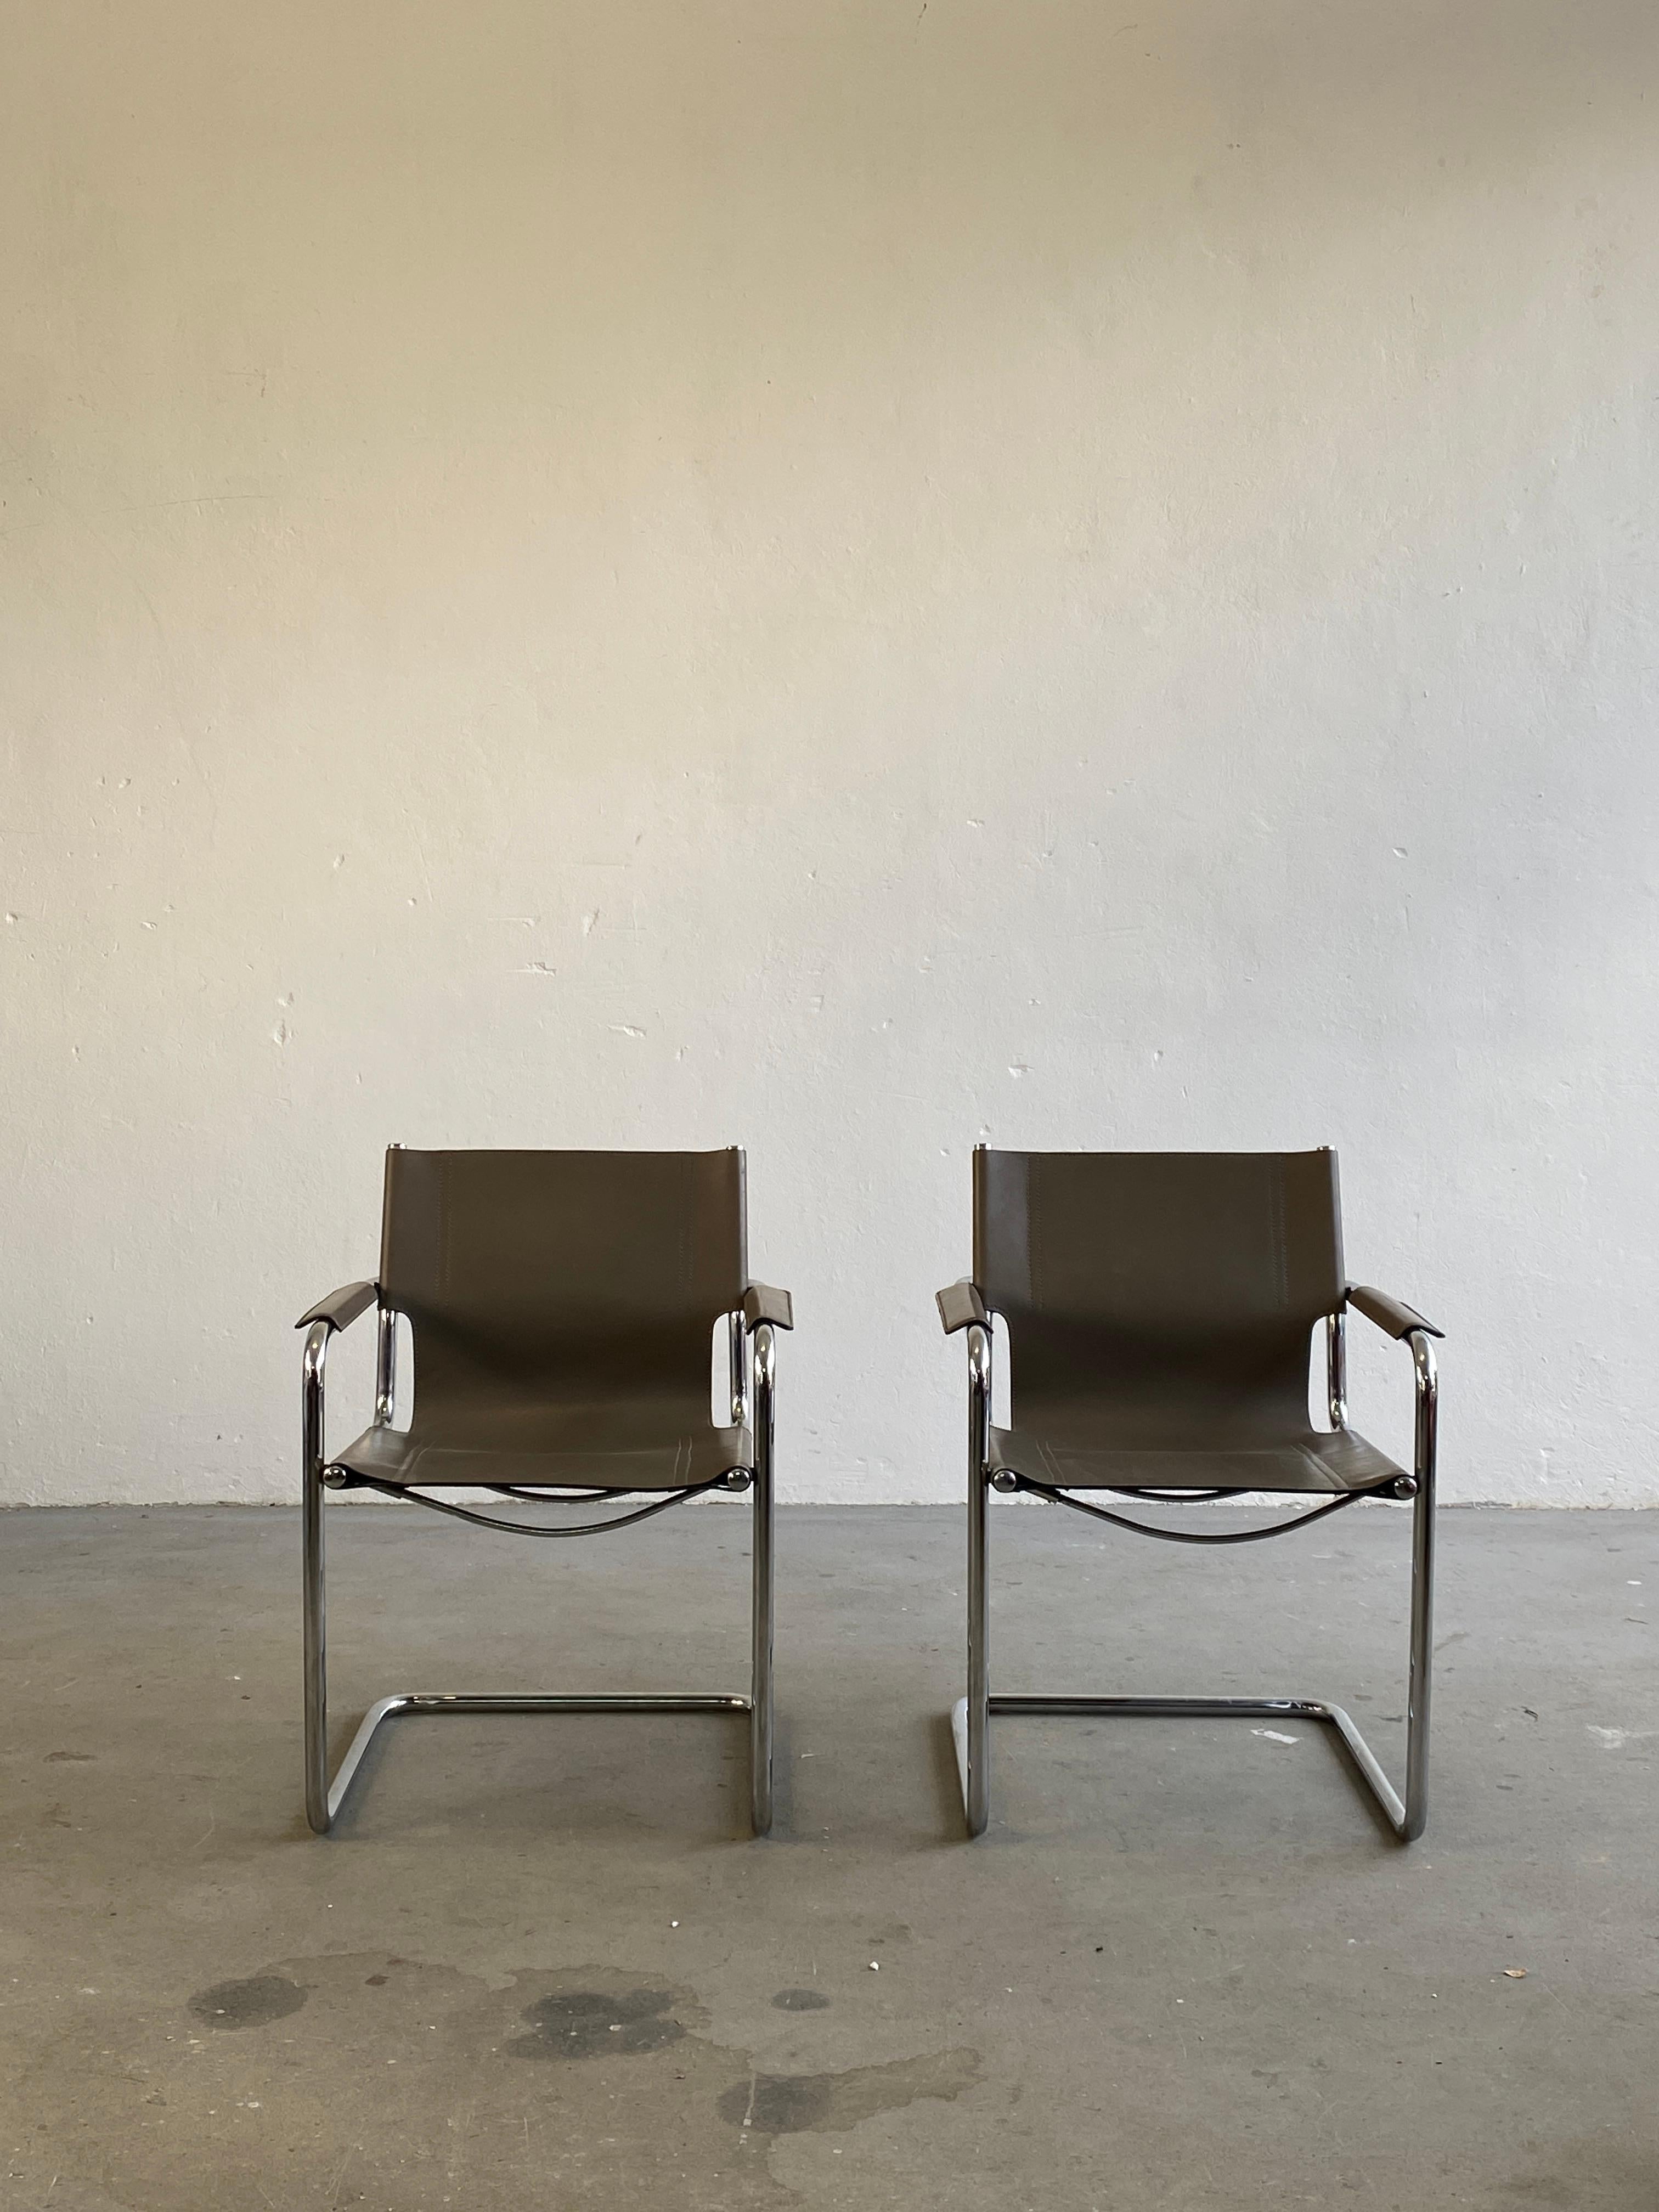 Vintage Leather Cantilever Chairs, Centro Studi for Matteo Grassi, 1980s Italy 3